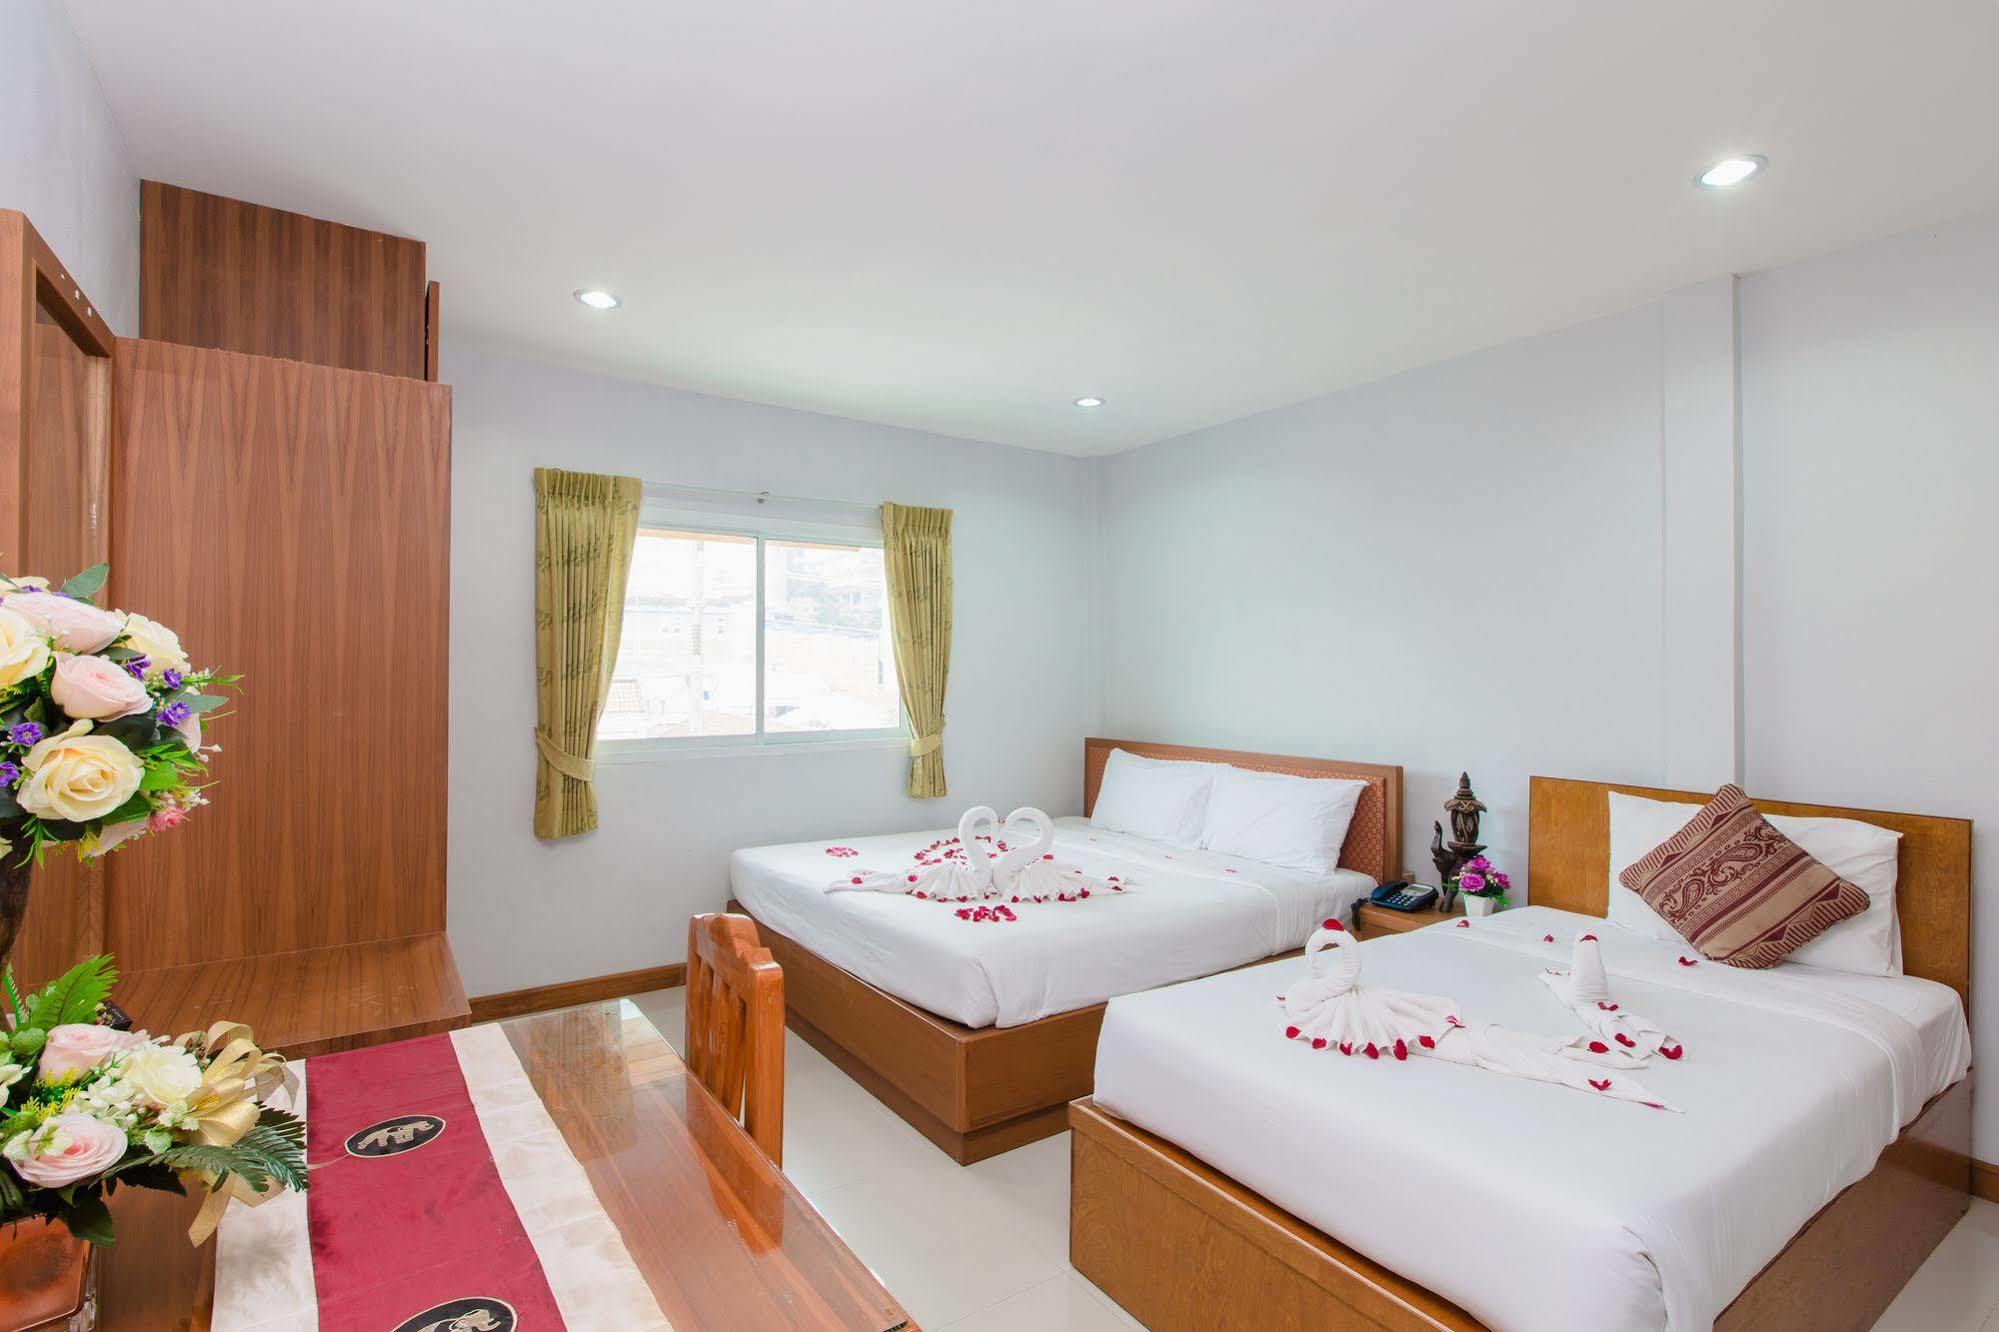 Amarin residence patong. AMARIN Residence Patong 3*. AMARIN Residence Patong 3* 1322$. Таиланд Patong Lodge 3* Патонг, Пхукет. Q Victory Patong Hotel and Residence.